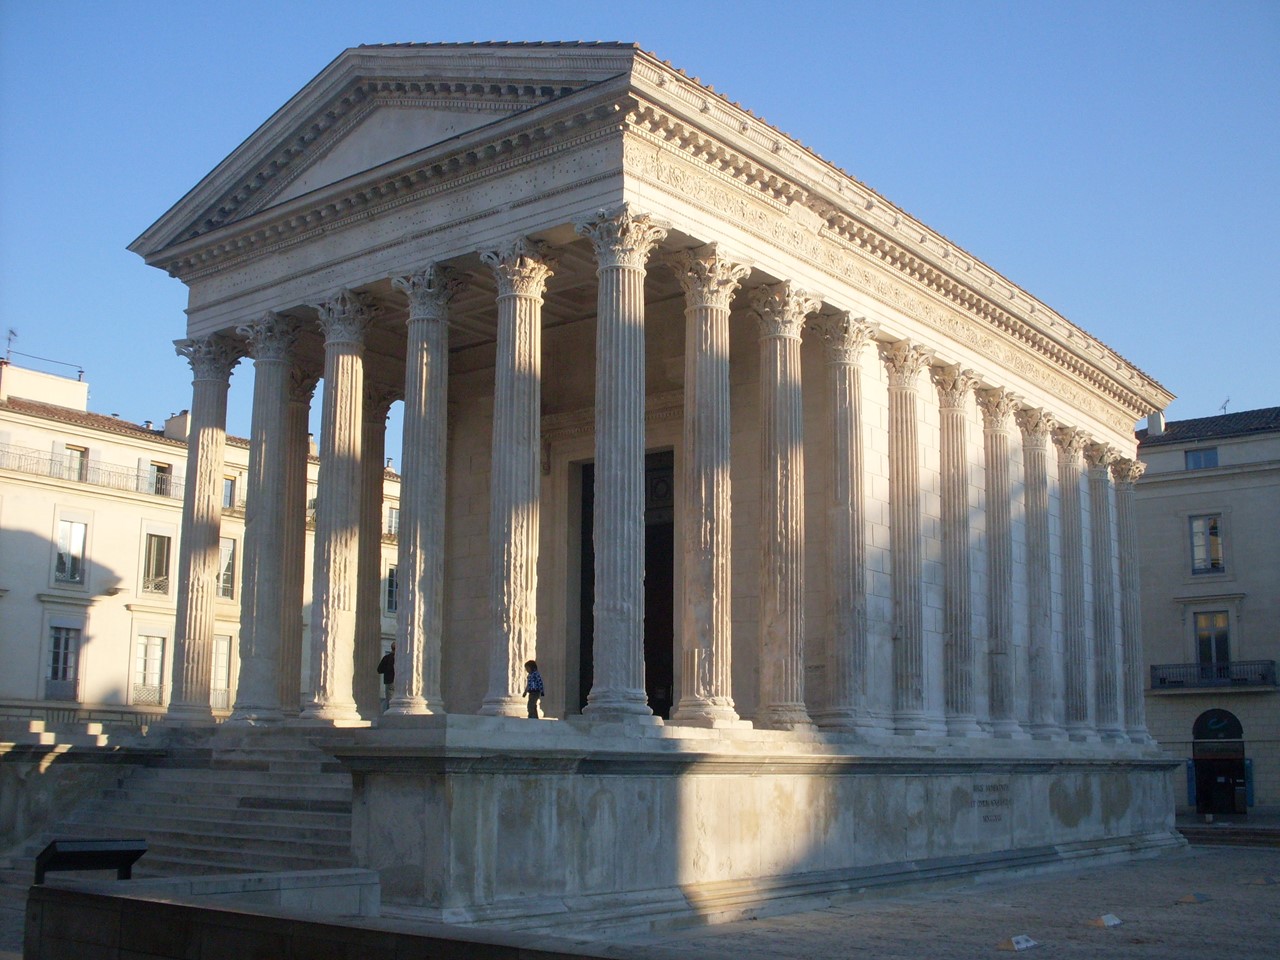 The Maison Carrée at Nîmes, a hexastyle pseudoperipteral Roman temple